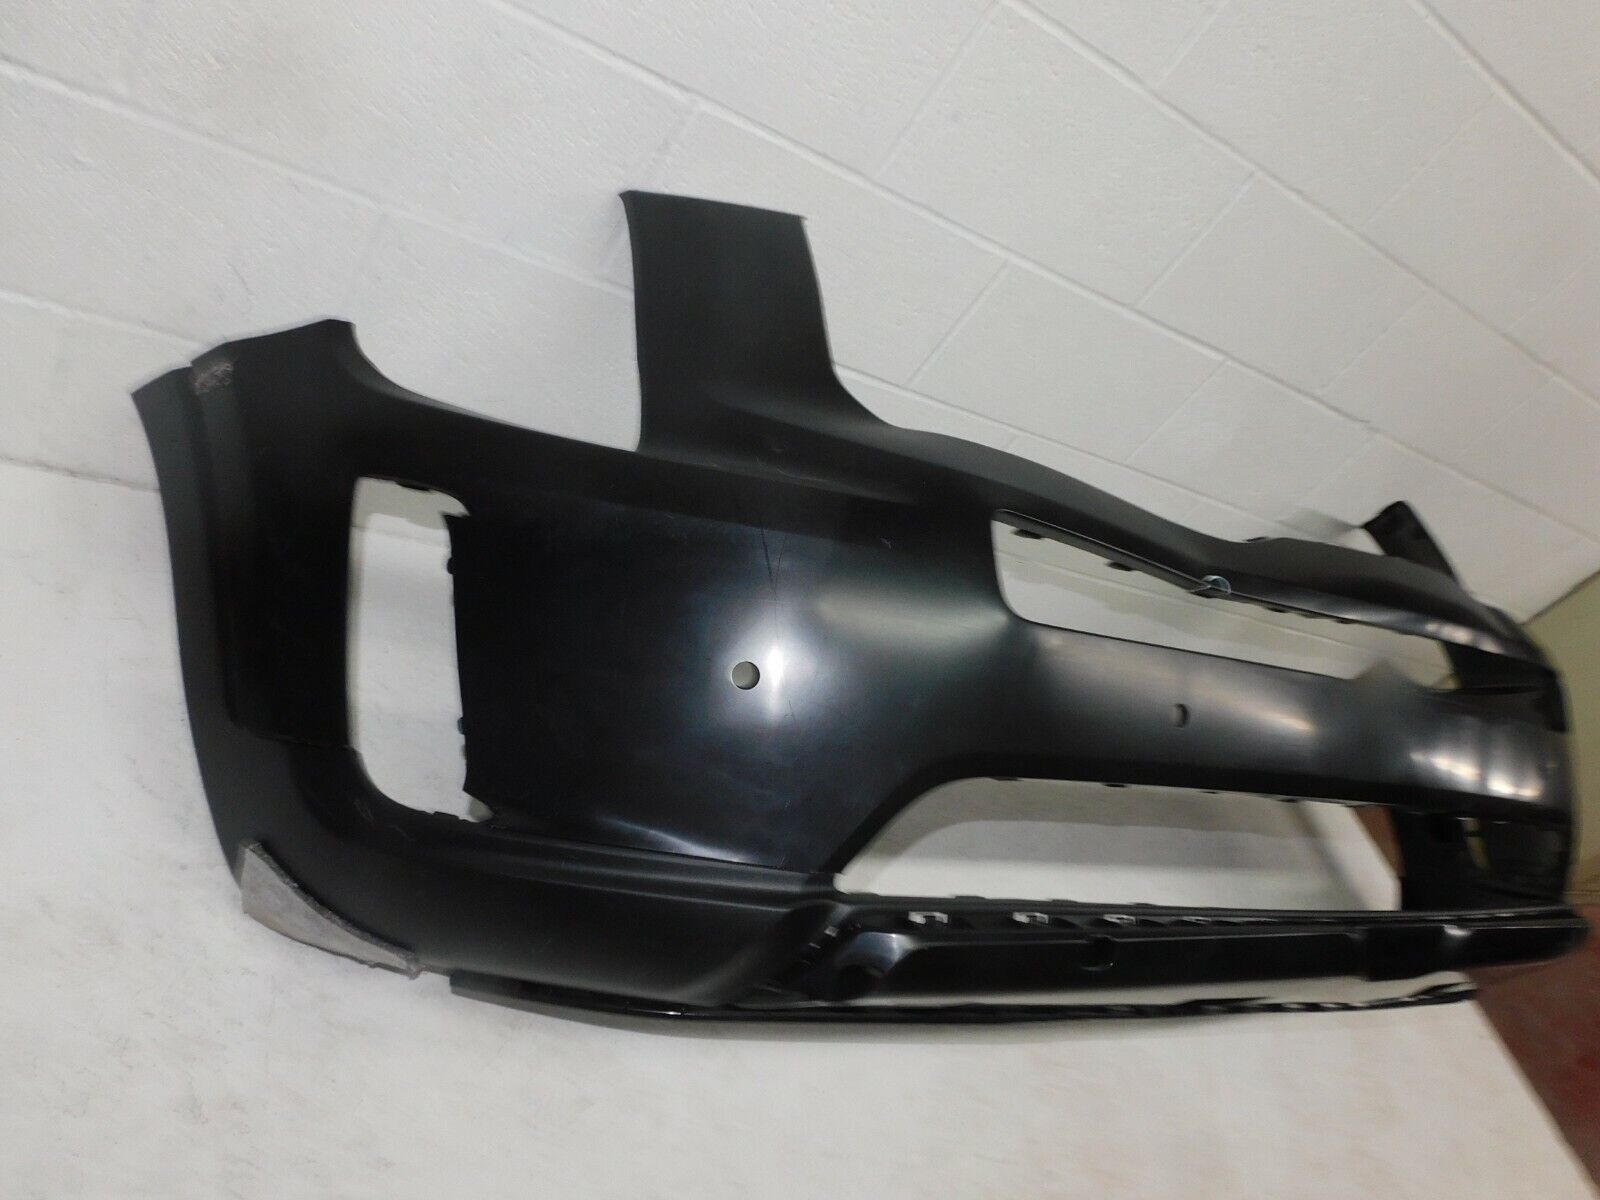 Used 2020 2022 Kia Telluride Front Bumper Cover Oem With Sensor Holes For Sale 86511 S9000 4577